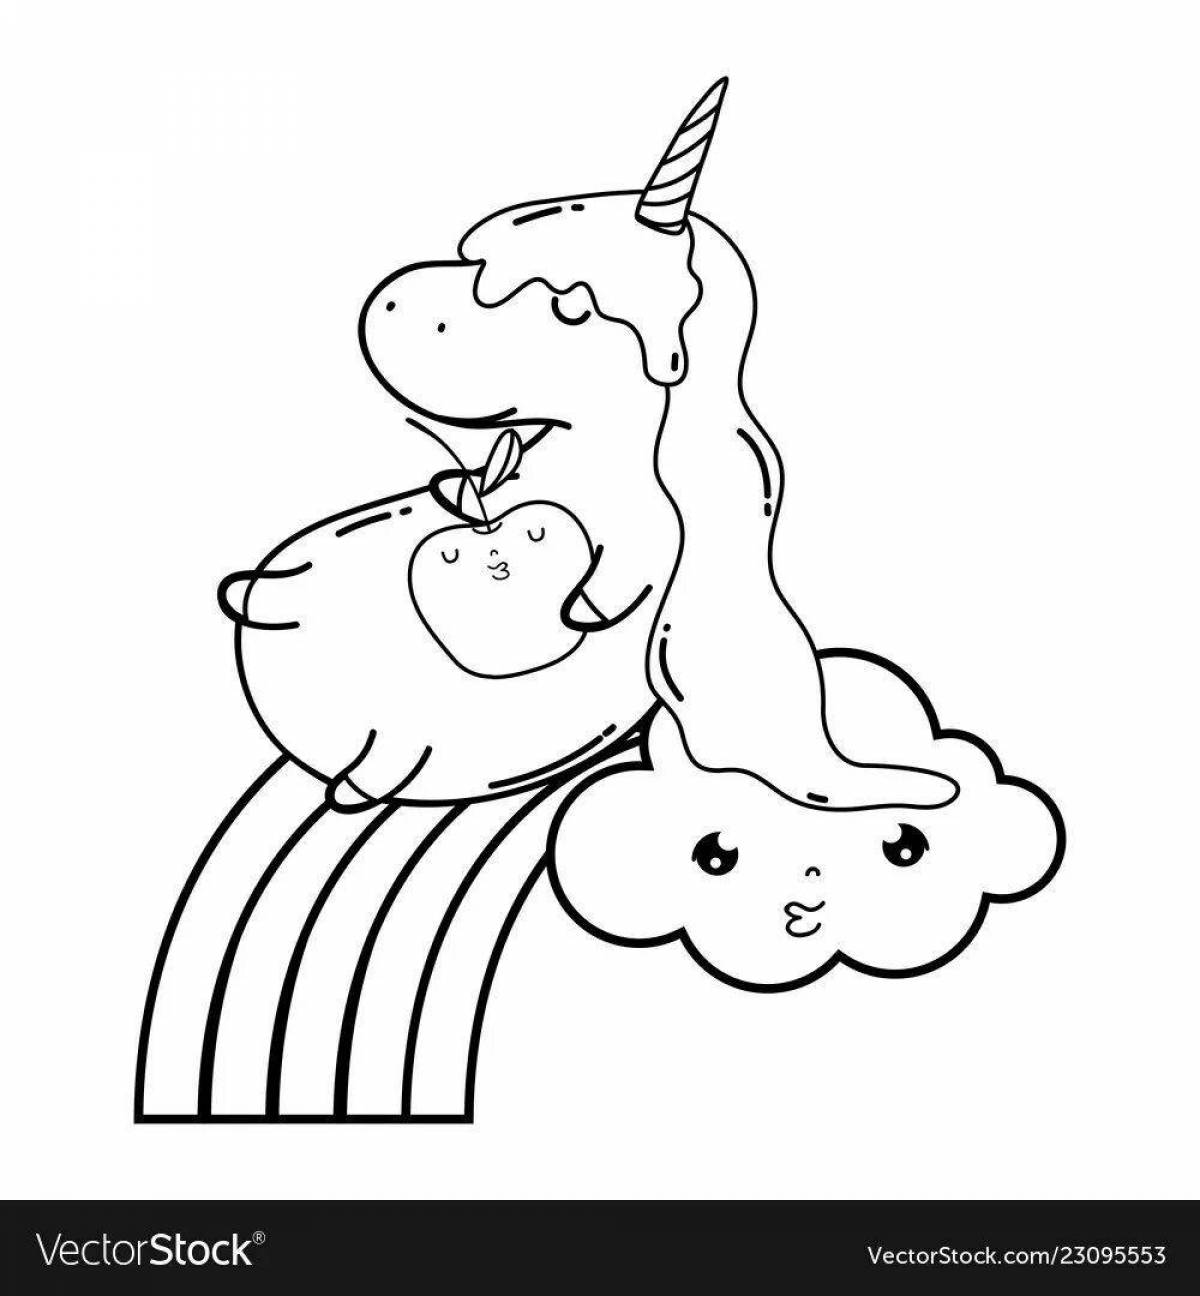 Serene coloring page unicorn cloud